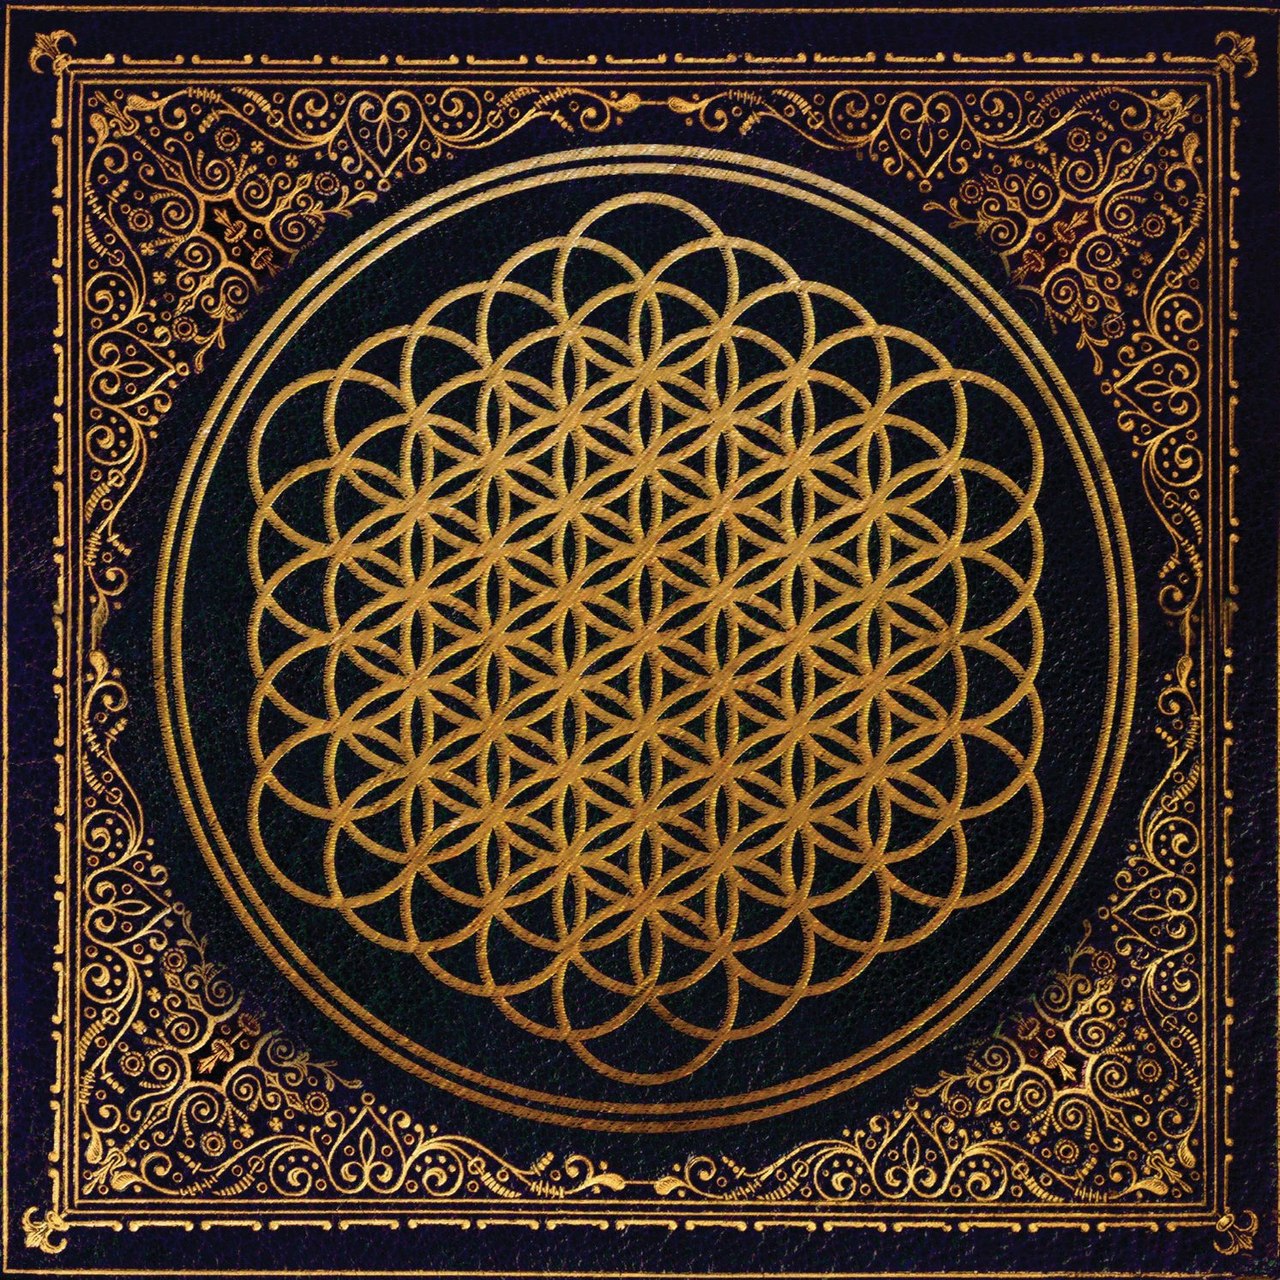 News Added Feb 25, 2013 Bring Me The Horizon 2013 is the year you will hear one of the most exciting albums of recent times. The album in question is 'Sempiternal' and it is the fourth studio album by platinum selling metal giants Bring Me The Horizon. 'Sempiternal' is out on April 29th. This year […]